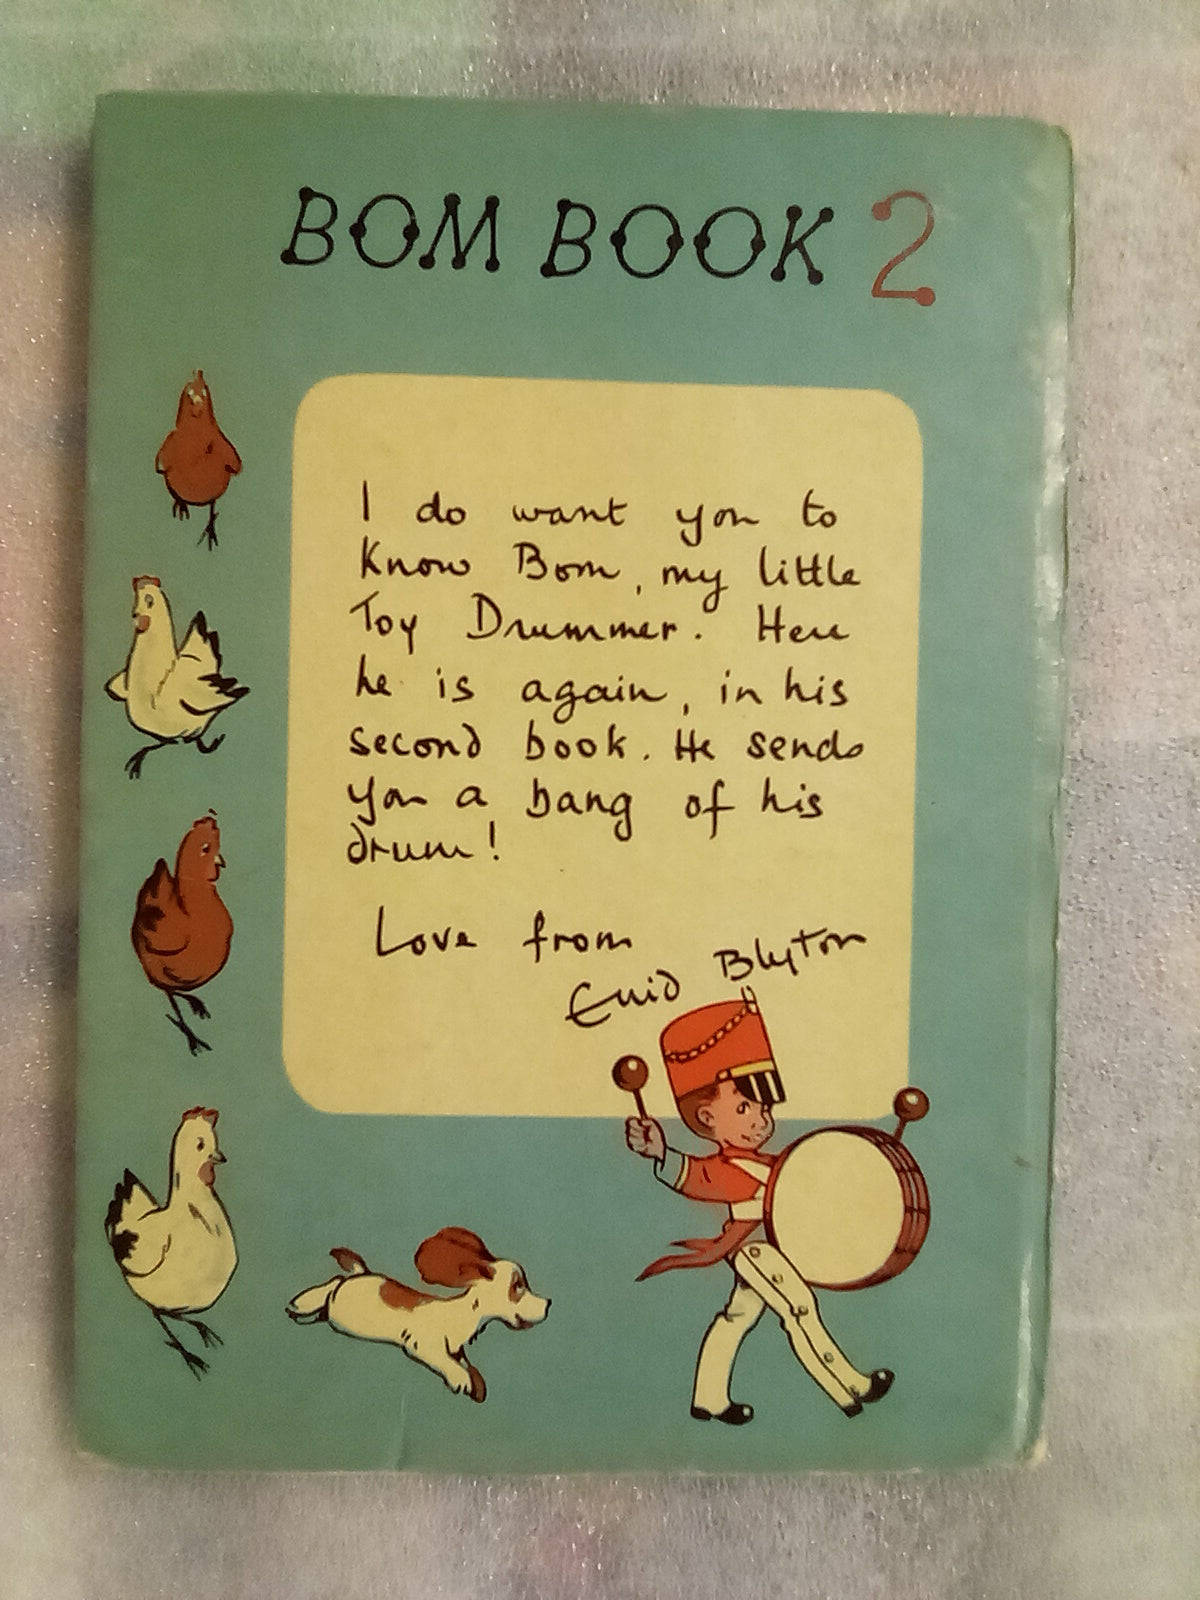 Bom and His Magic Drumstick by Enid Blyton (1957)